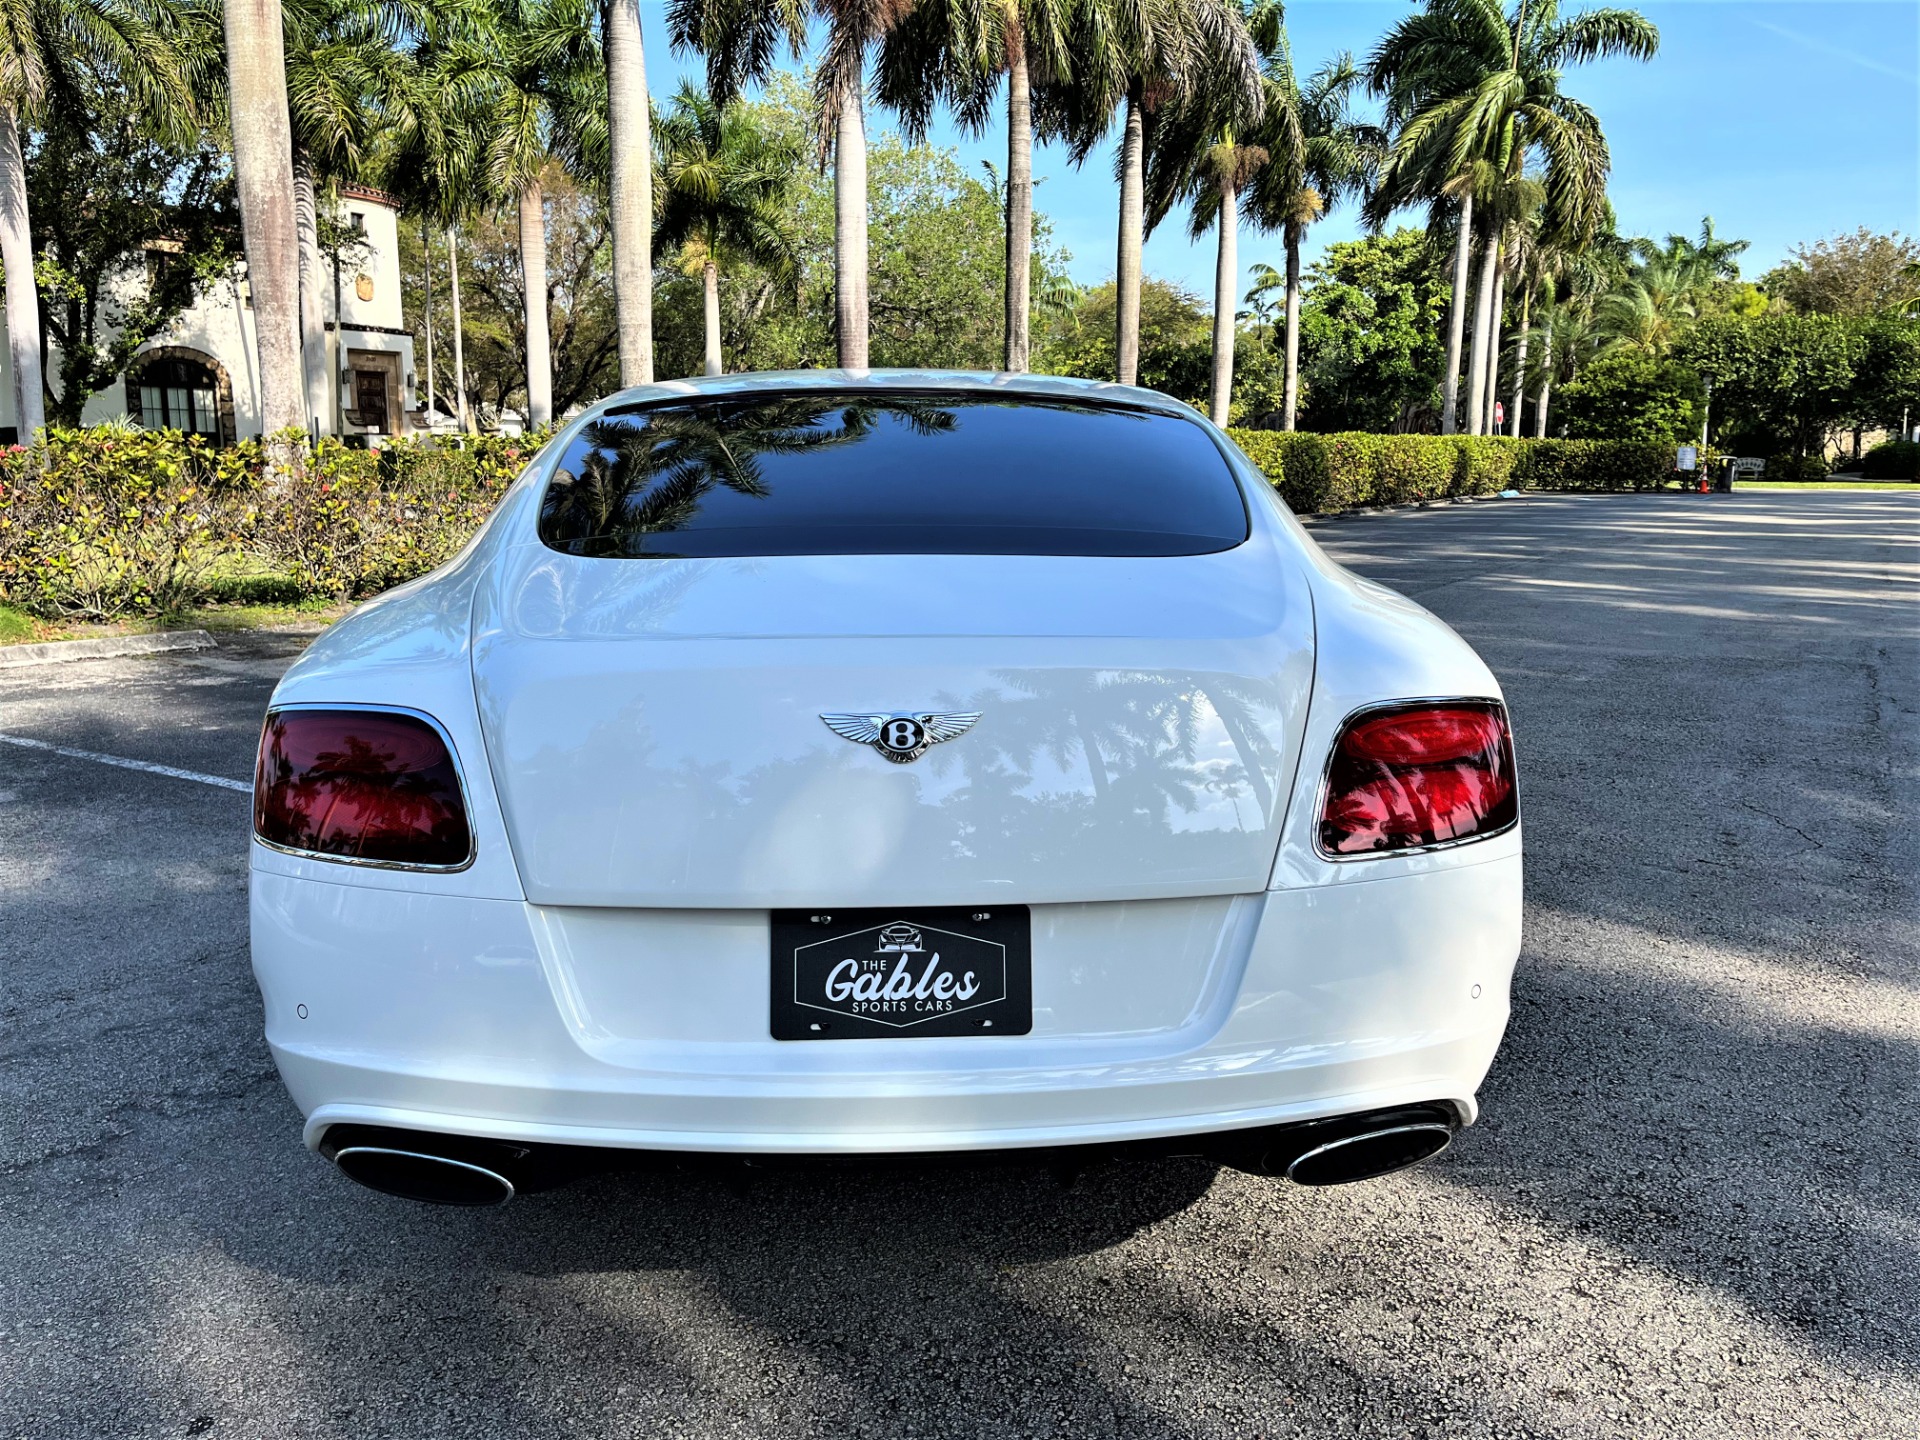 Used 2015 Bentley Continental GT Speed for sale $131,850 at The Gables Sports Cars in Miami FL 33146 3